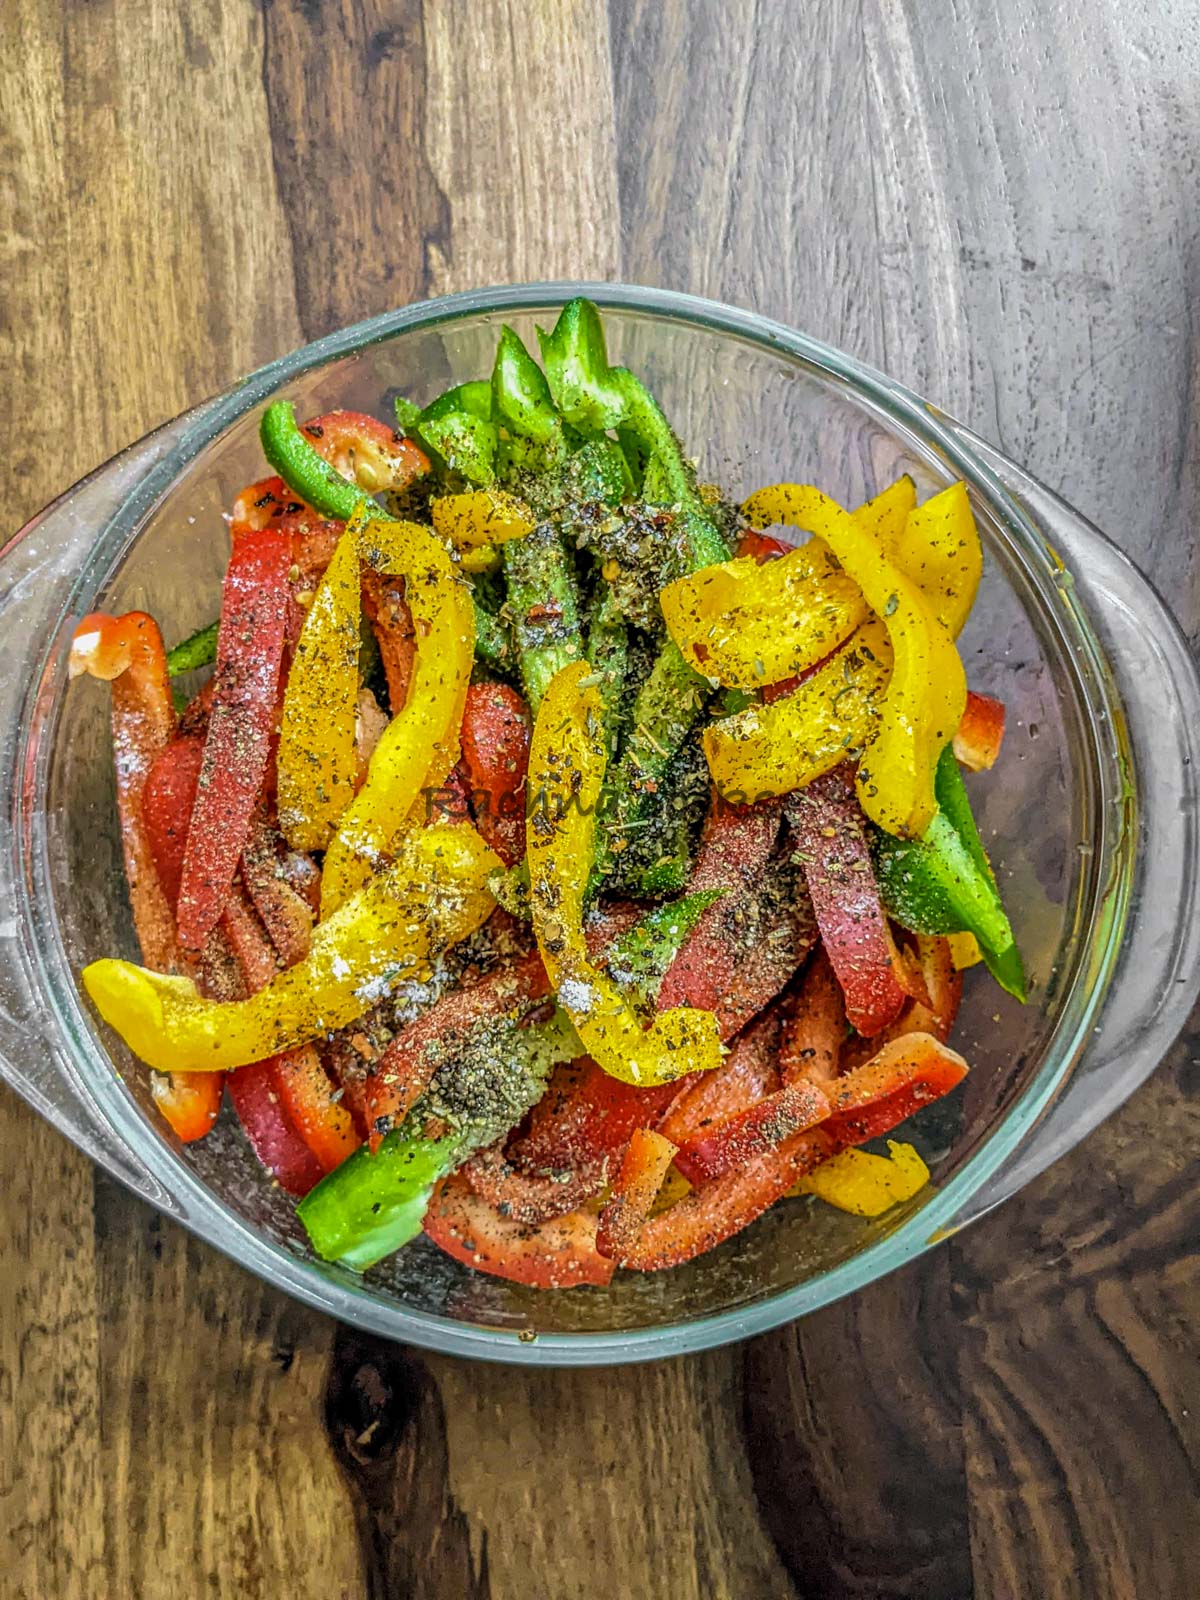 Peppers with sprinkled spices and oil